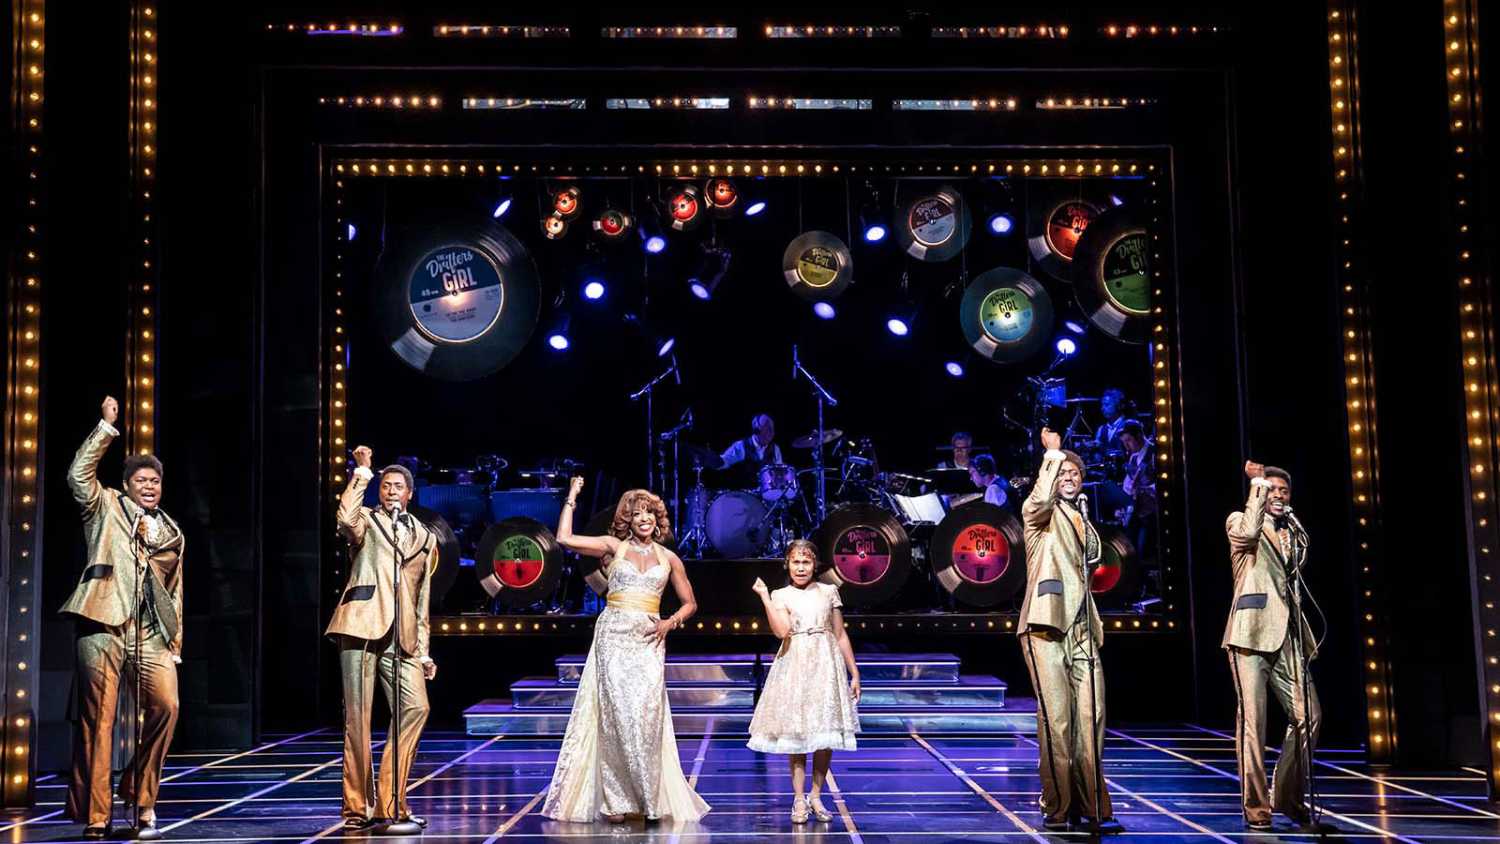 The Drifters Girl continues at London’s Garrick Theatre